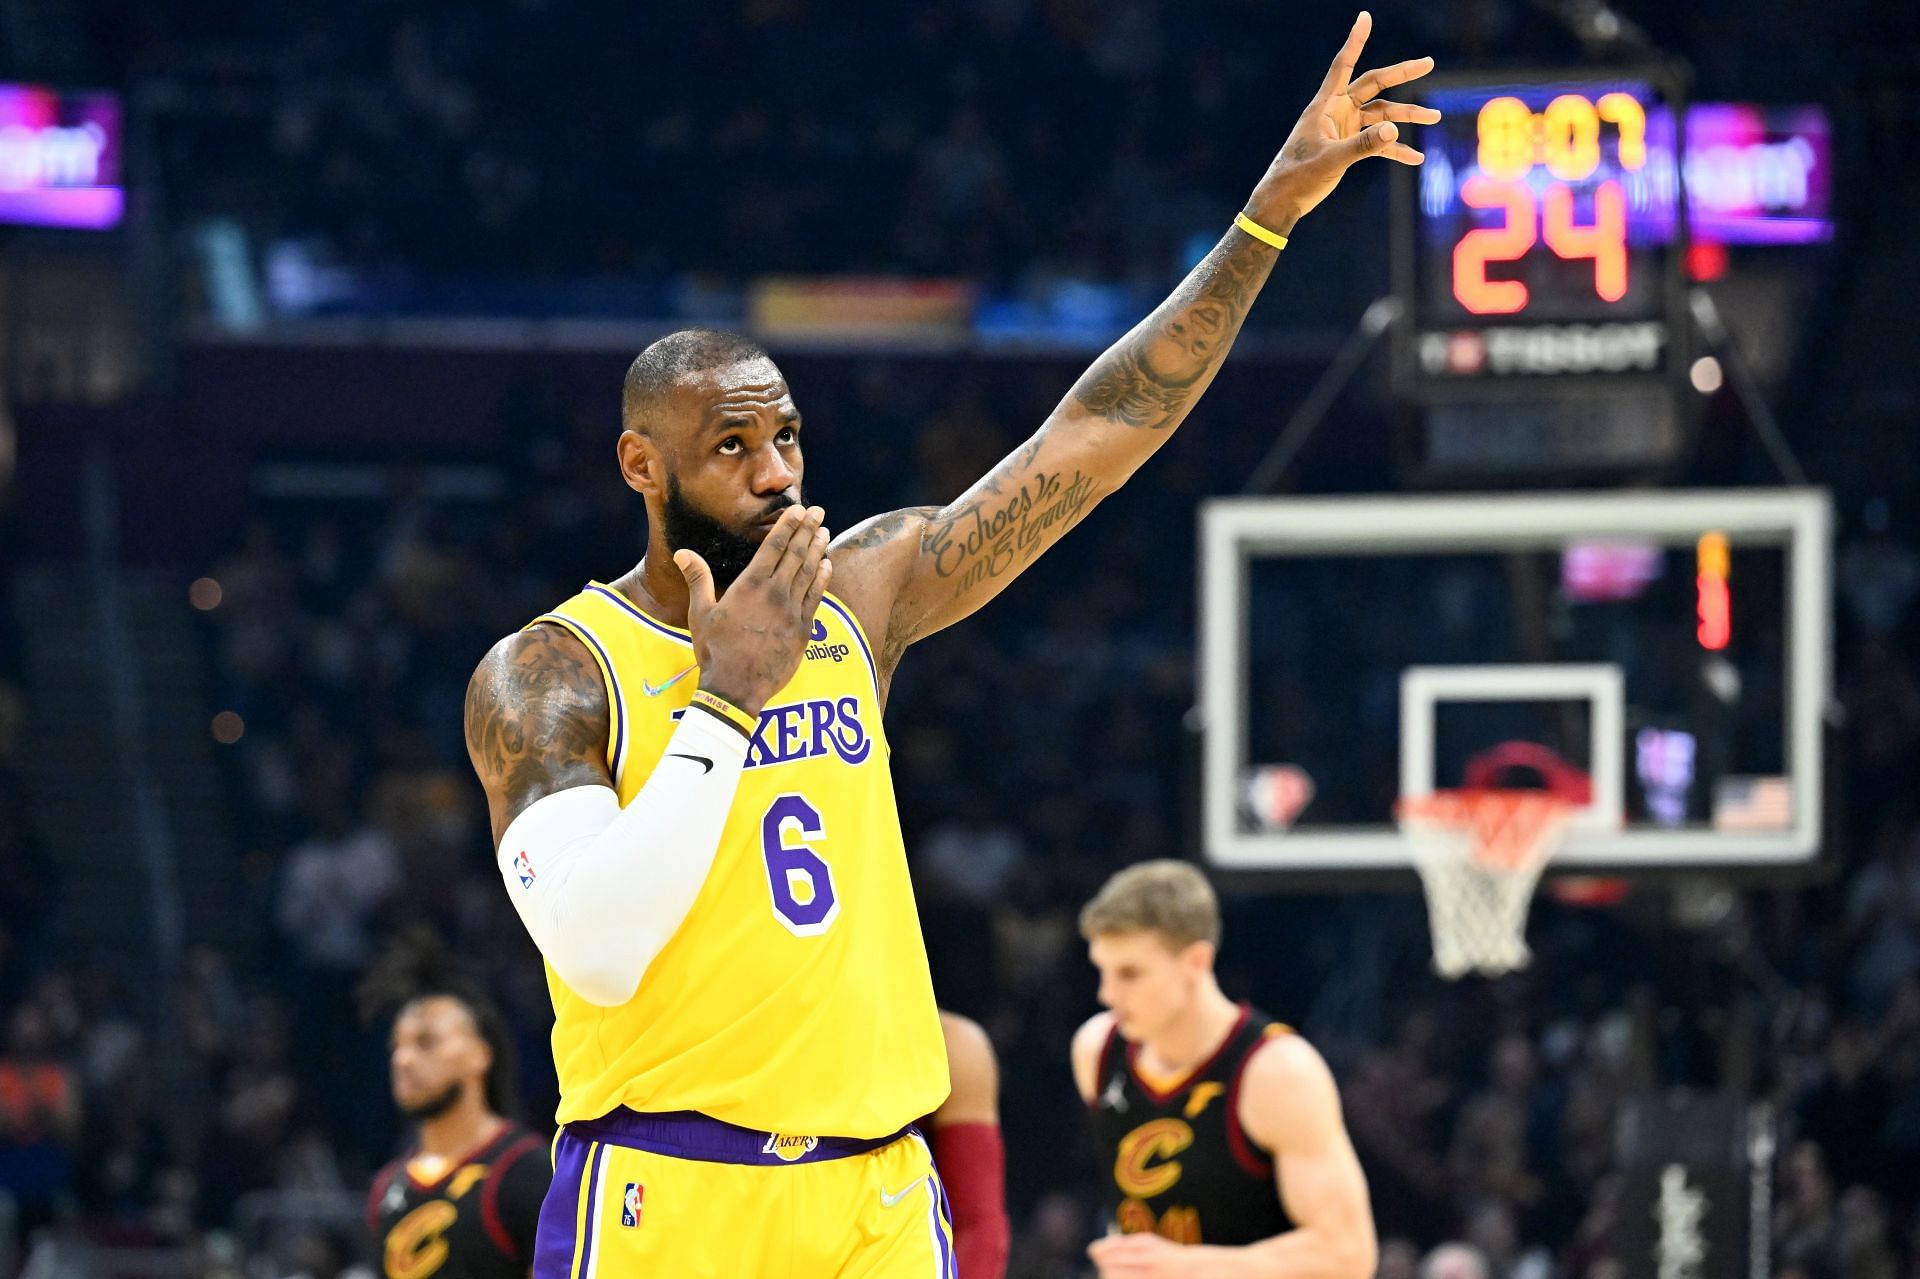 LeBron James of the LA Lakers waves to the crowd during the first quarter against the Cleveland Cavaliers.